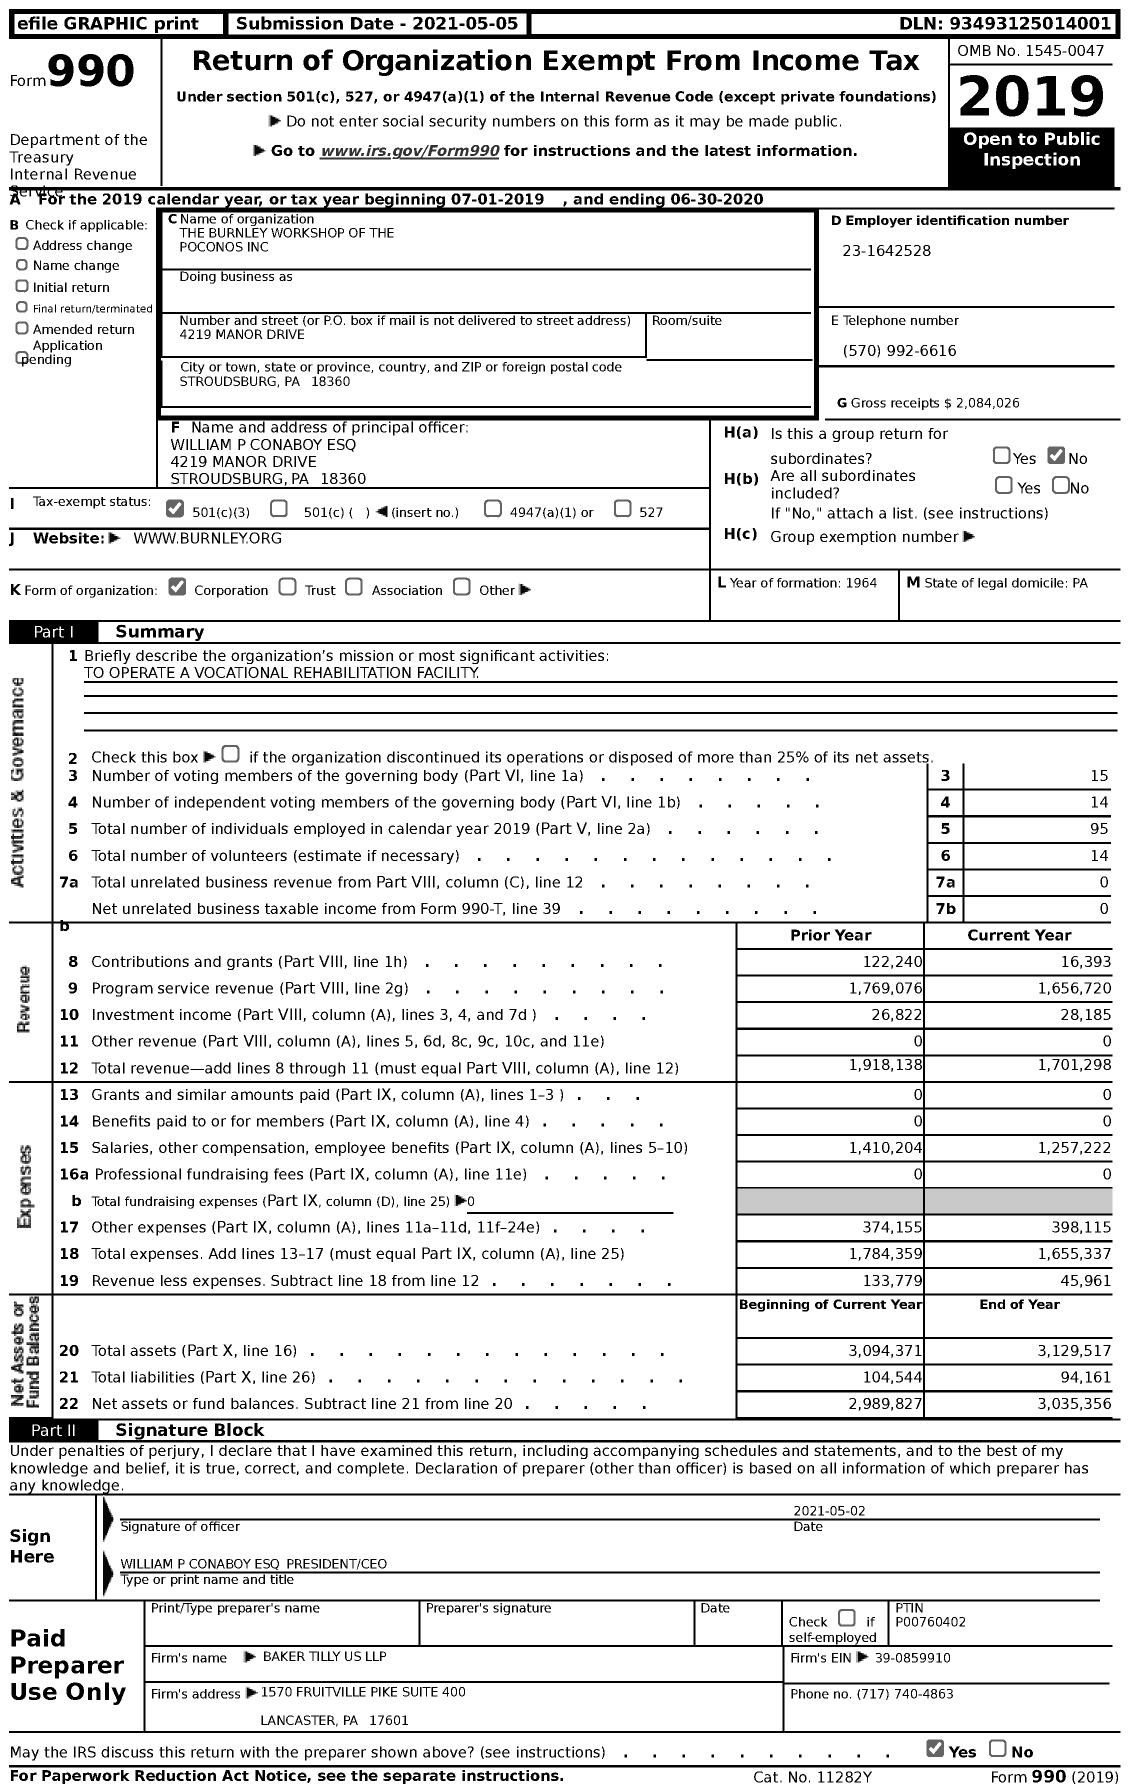 Image of first page of 2019 Form 990 for The Burnley Workshop of The Poconos